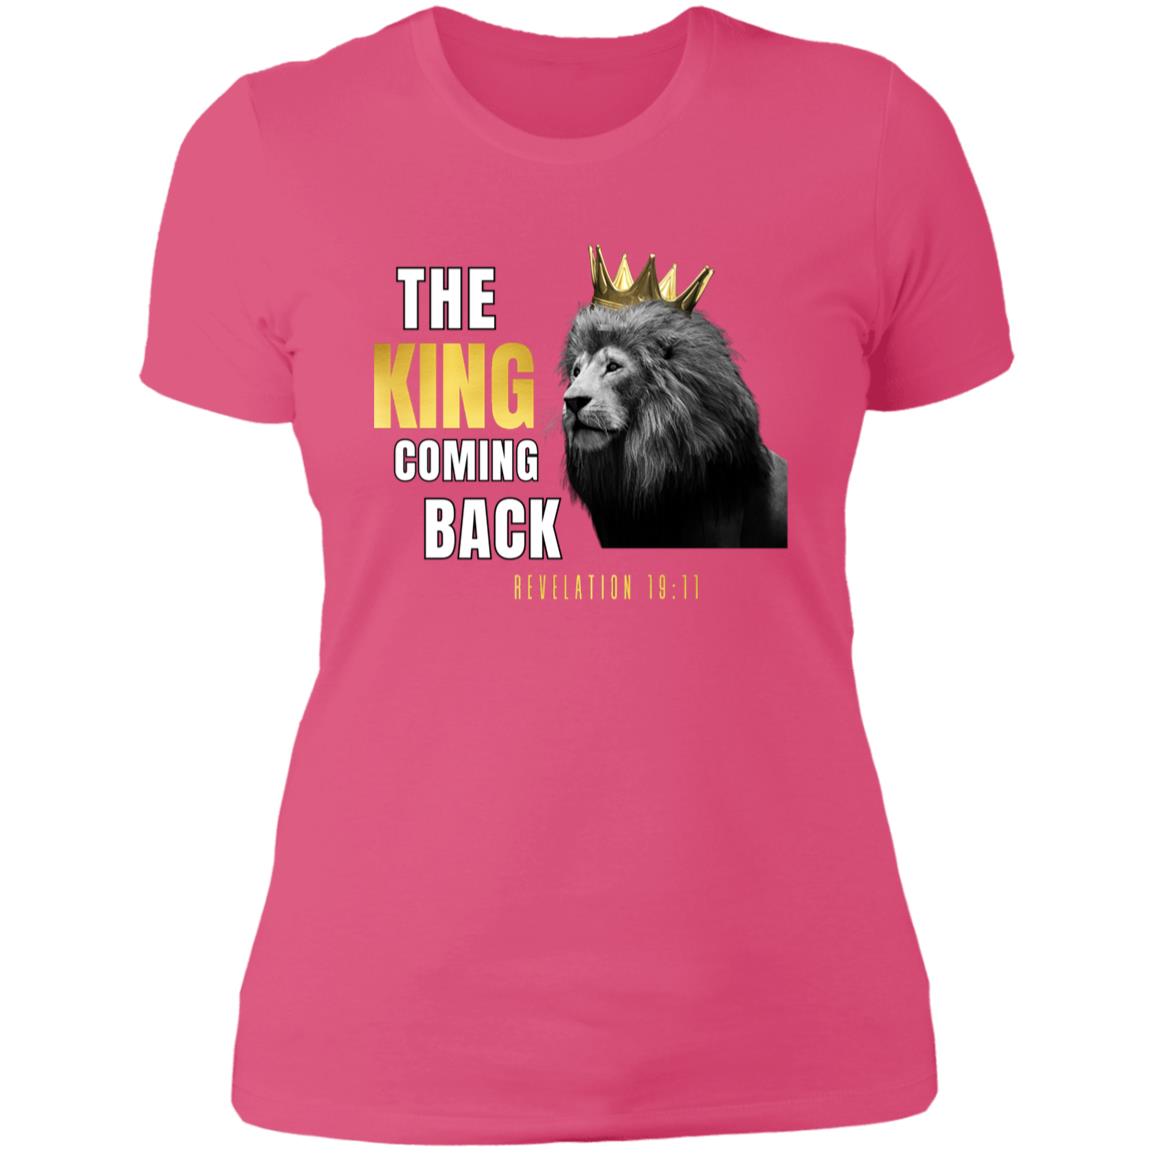 The KING Coming Back Ladies'  T-Shirt